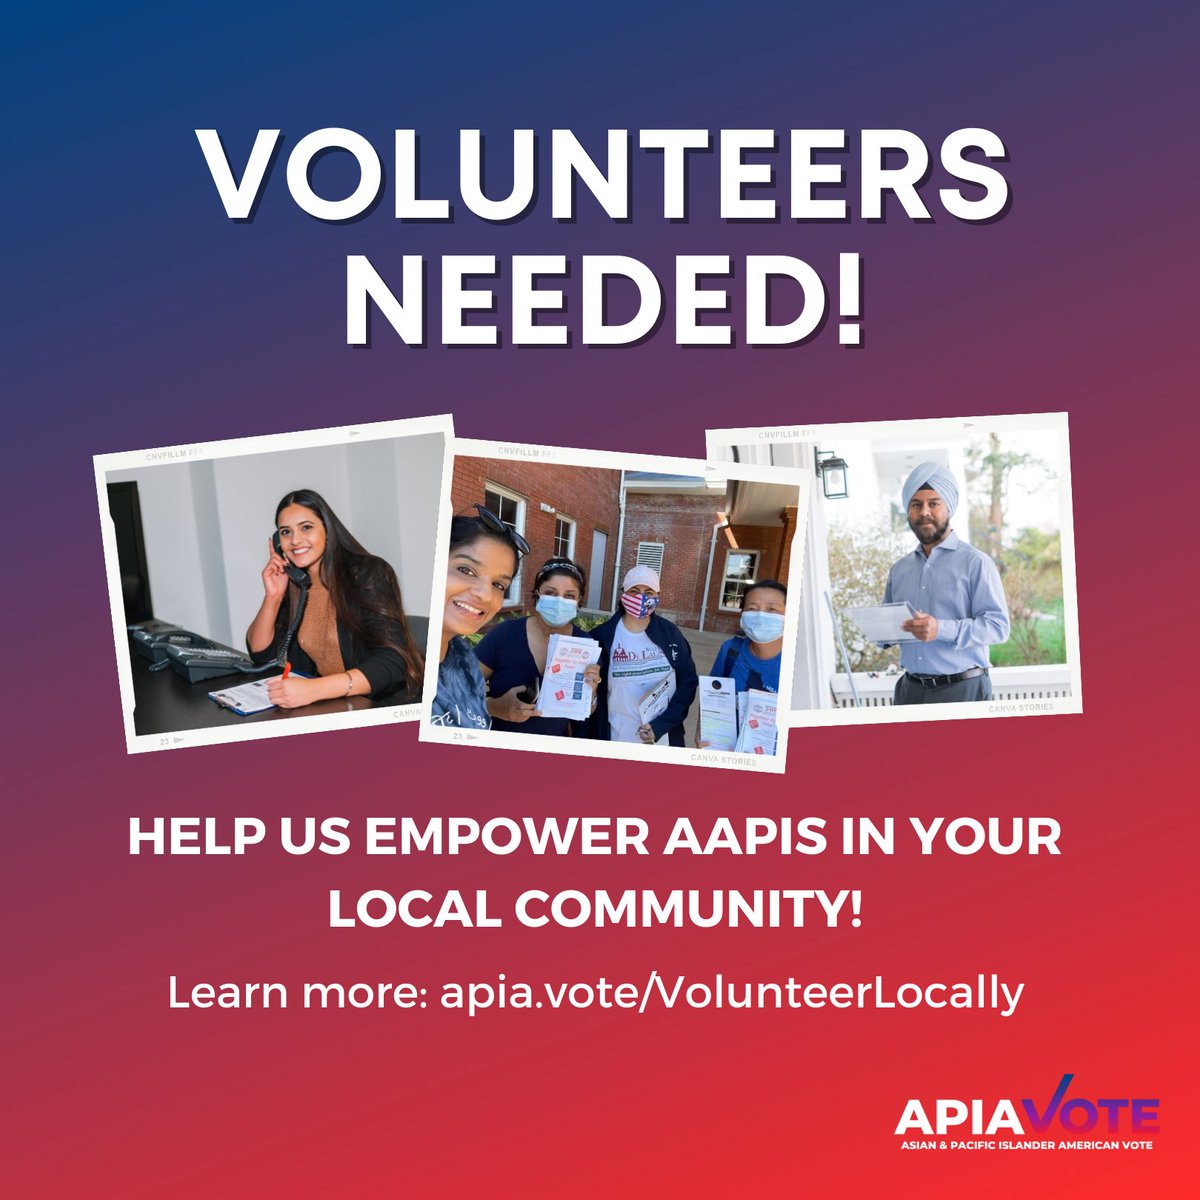 Help empower AAPIs this critical midterm election year by volunteering with APIAVote or our local partners! Learn more at apia.vote/VolunteerLocal…!